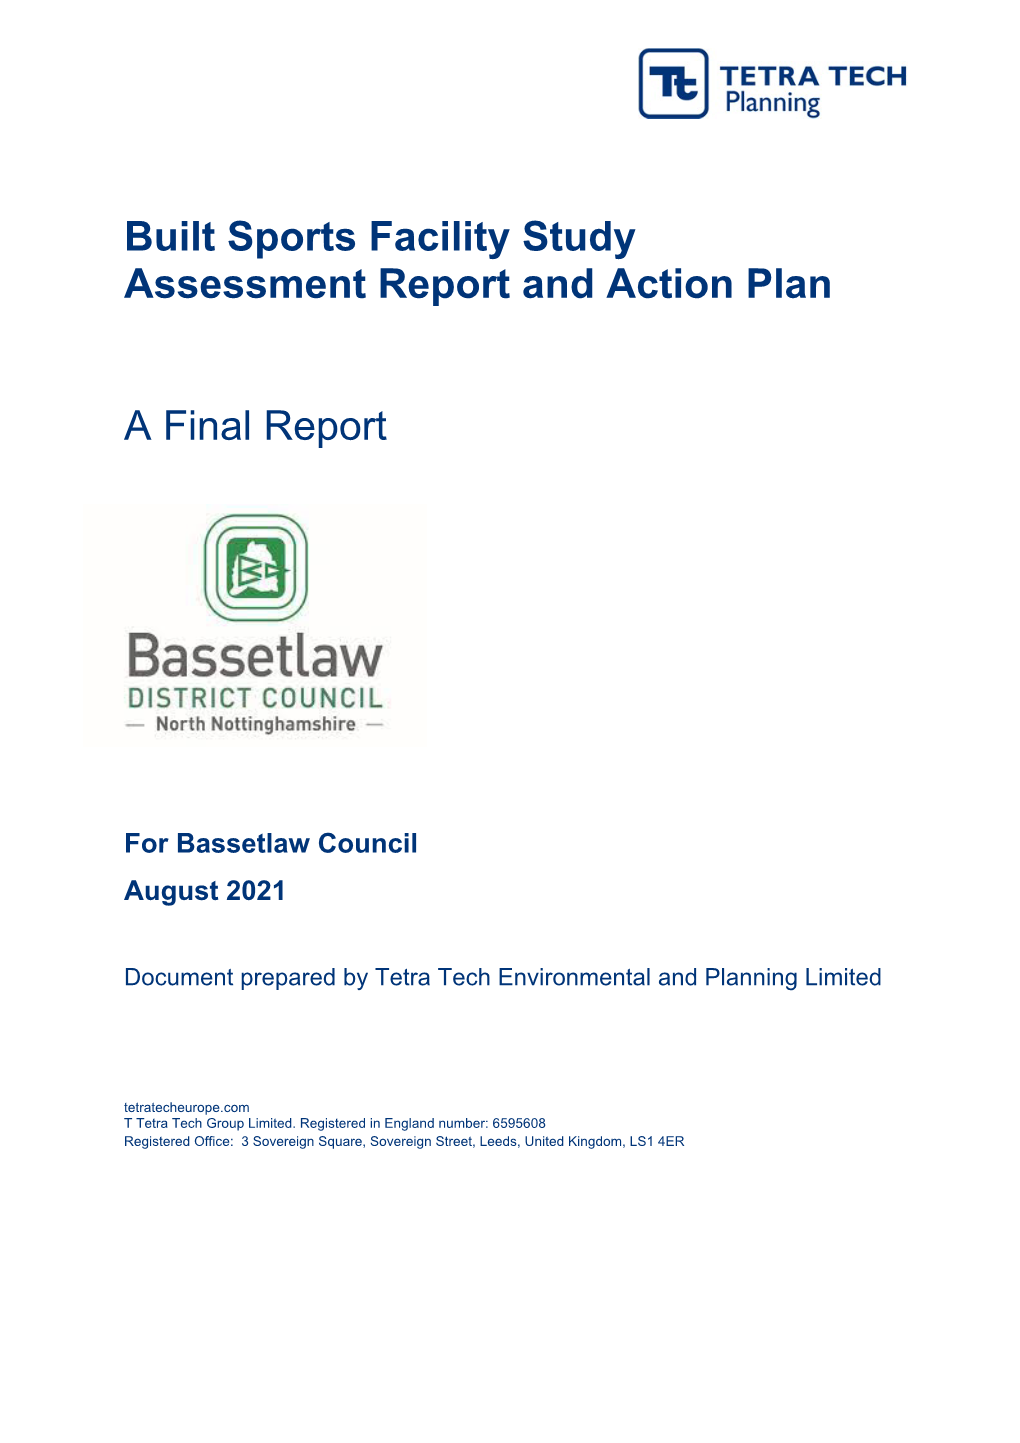 Built Sports Facility Study Assessment Report and Action Plan a Final Report